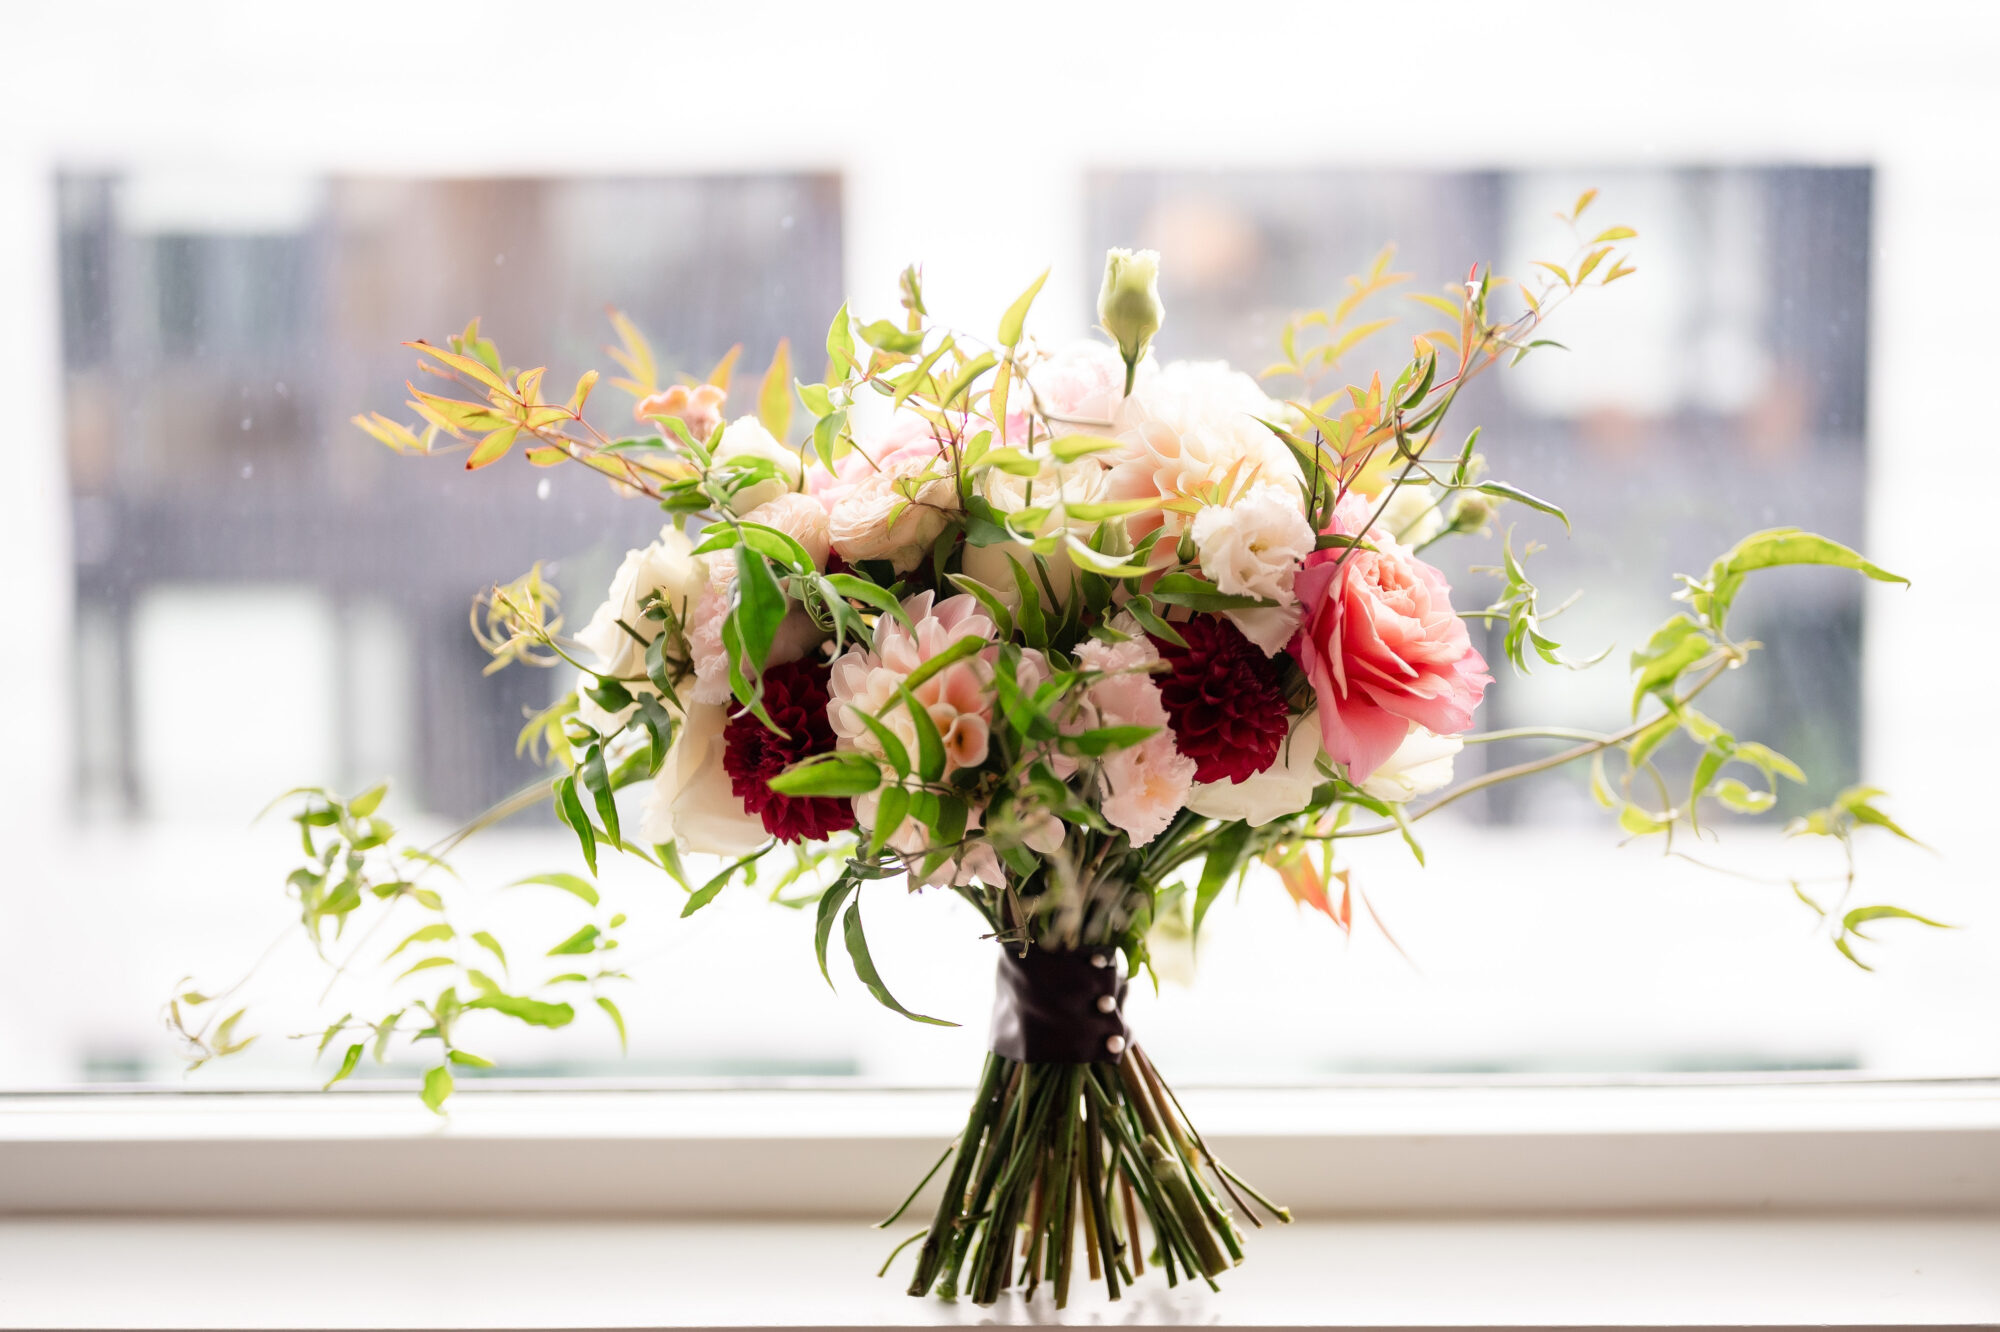 Intricately designed wedding flowers by Bramble & Blossom, featuring a harmonious blend of colors and textures for a memorable celebration in Pittsburgh • Pittsburgh Wedding Florist - Bramble & Blossom Beautiful and Sustainable Flowers